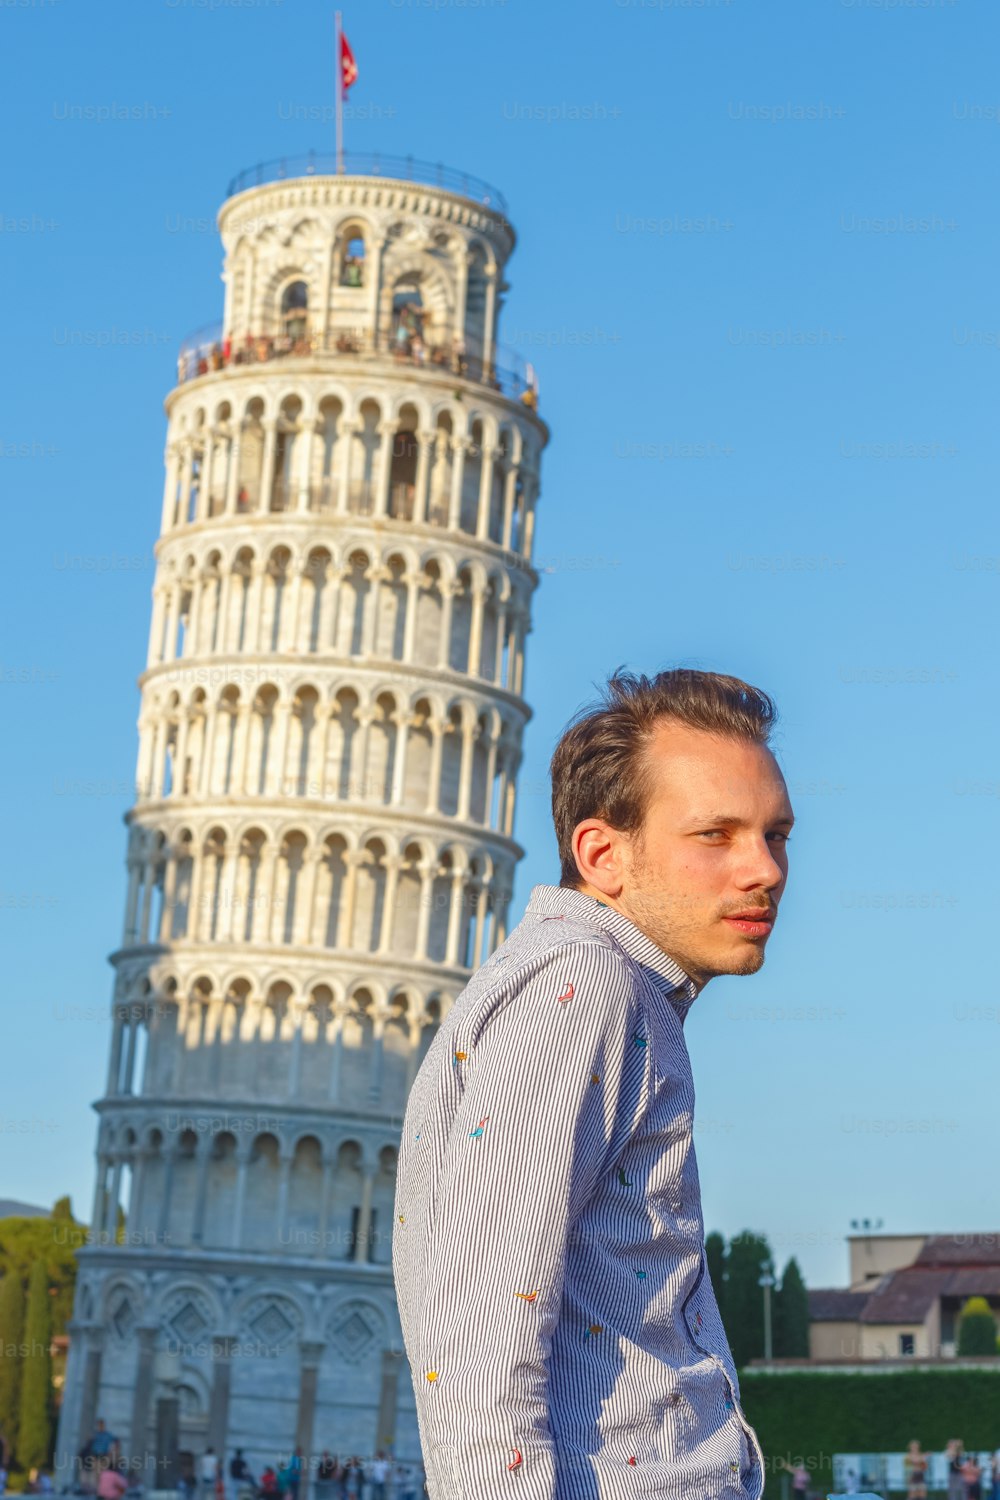 A white young man poses in front of the Leaning Tower in Pisa, Italy